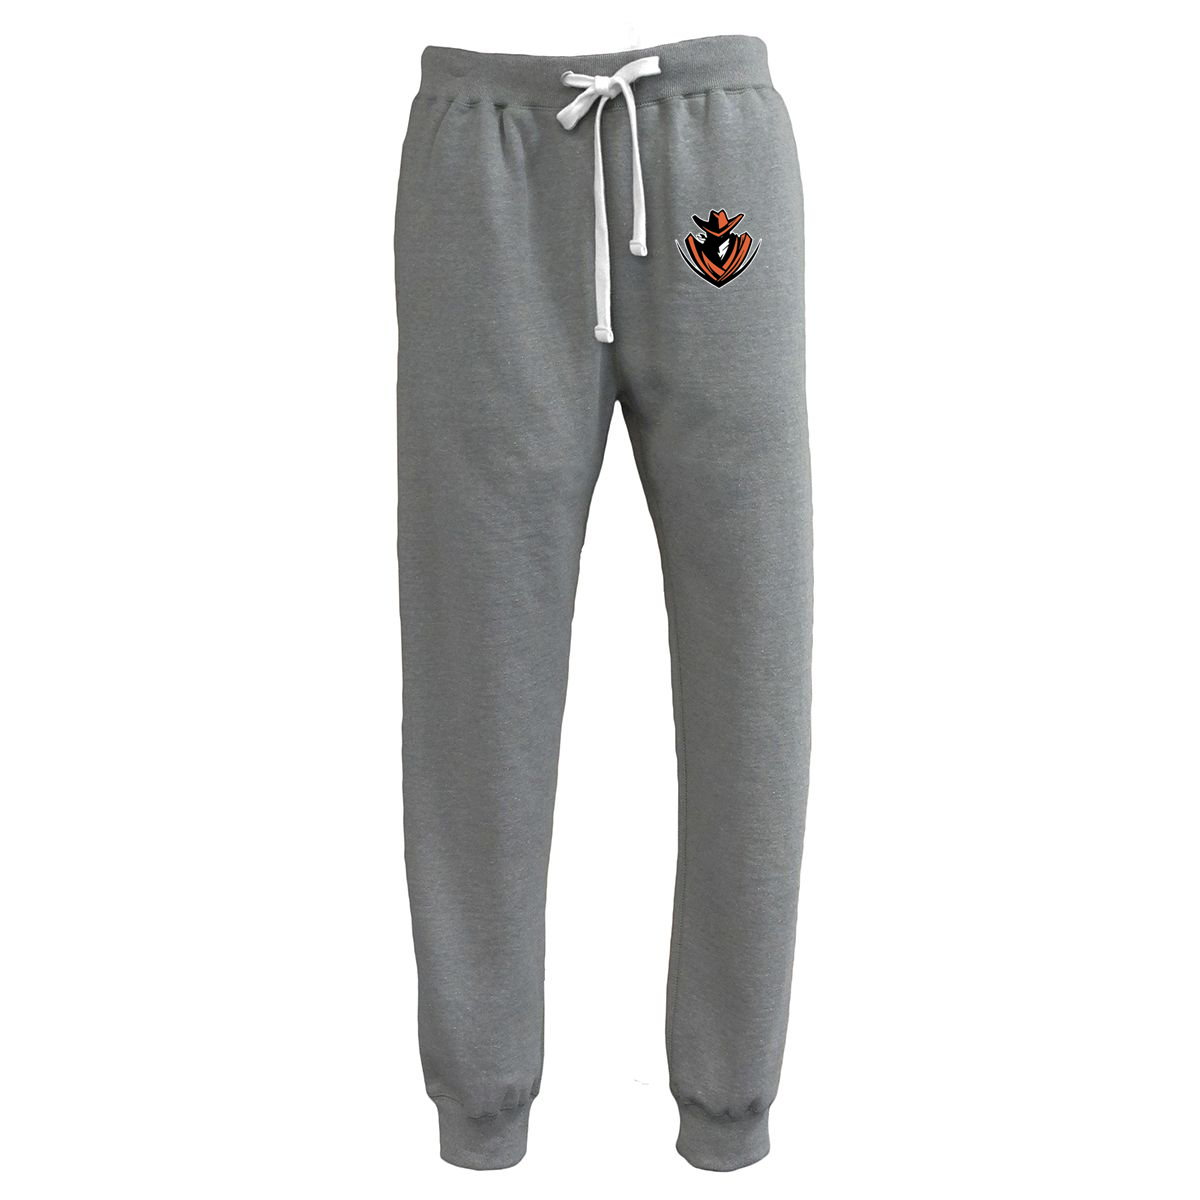 Outlaws Lacrosse Joggers